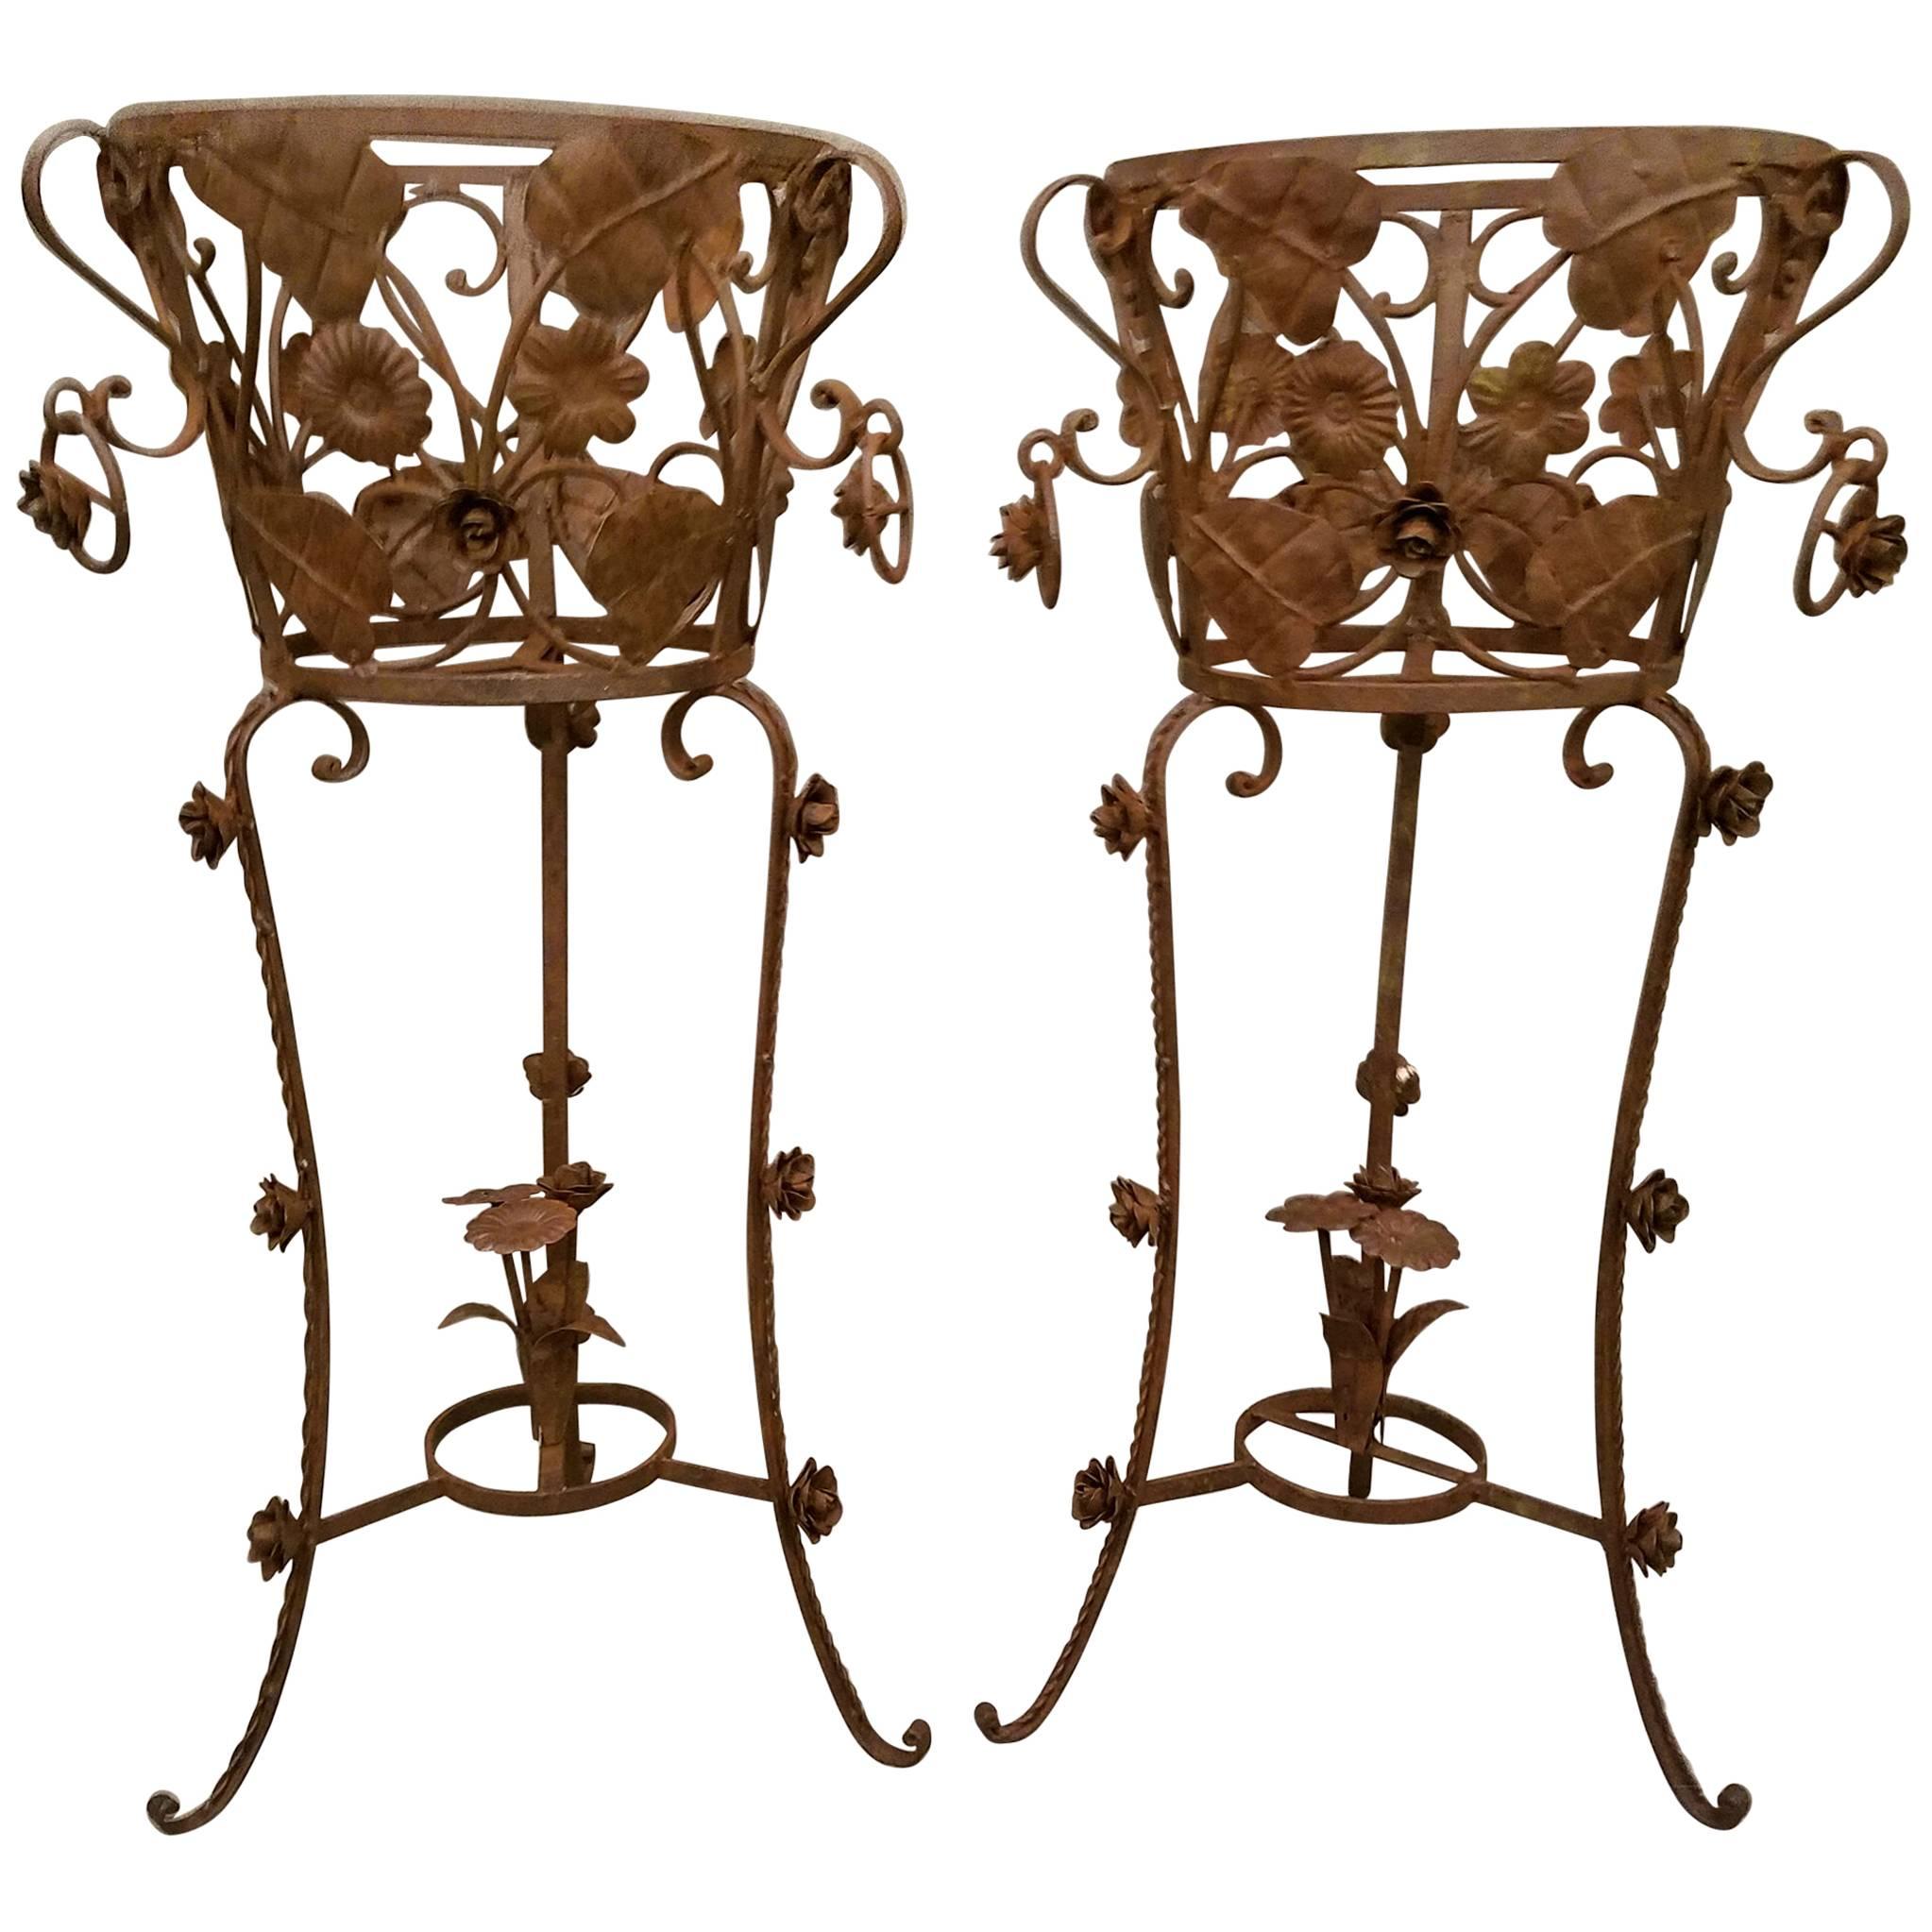 Pair of Iron Leaf and Flower Plant Stands